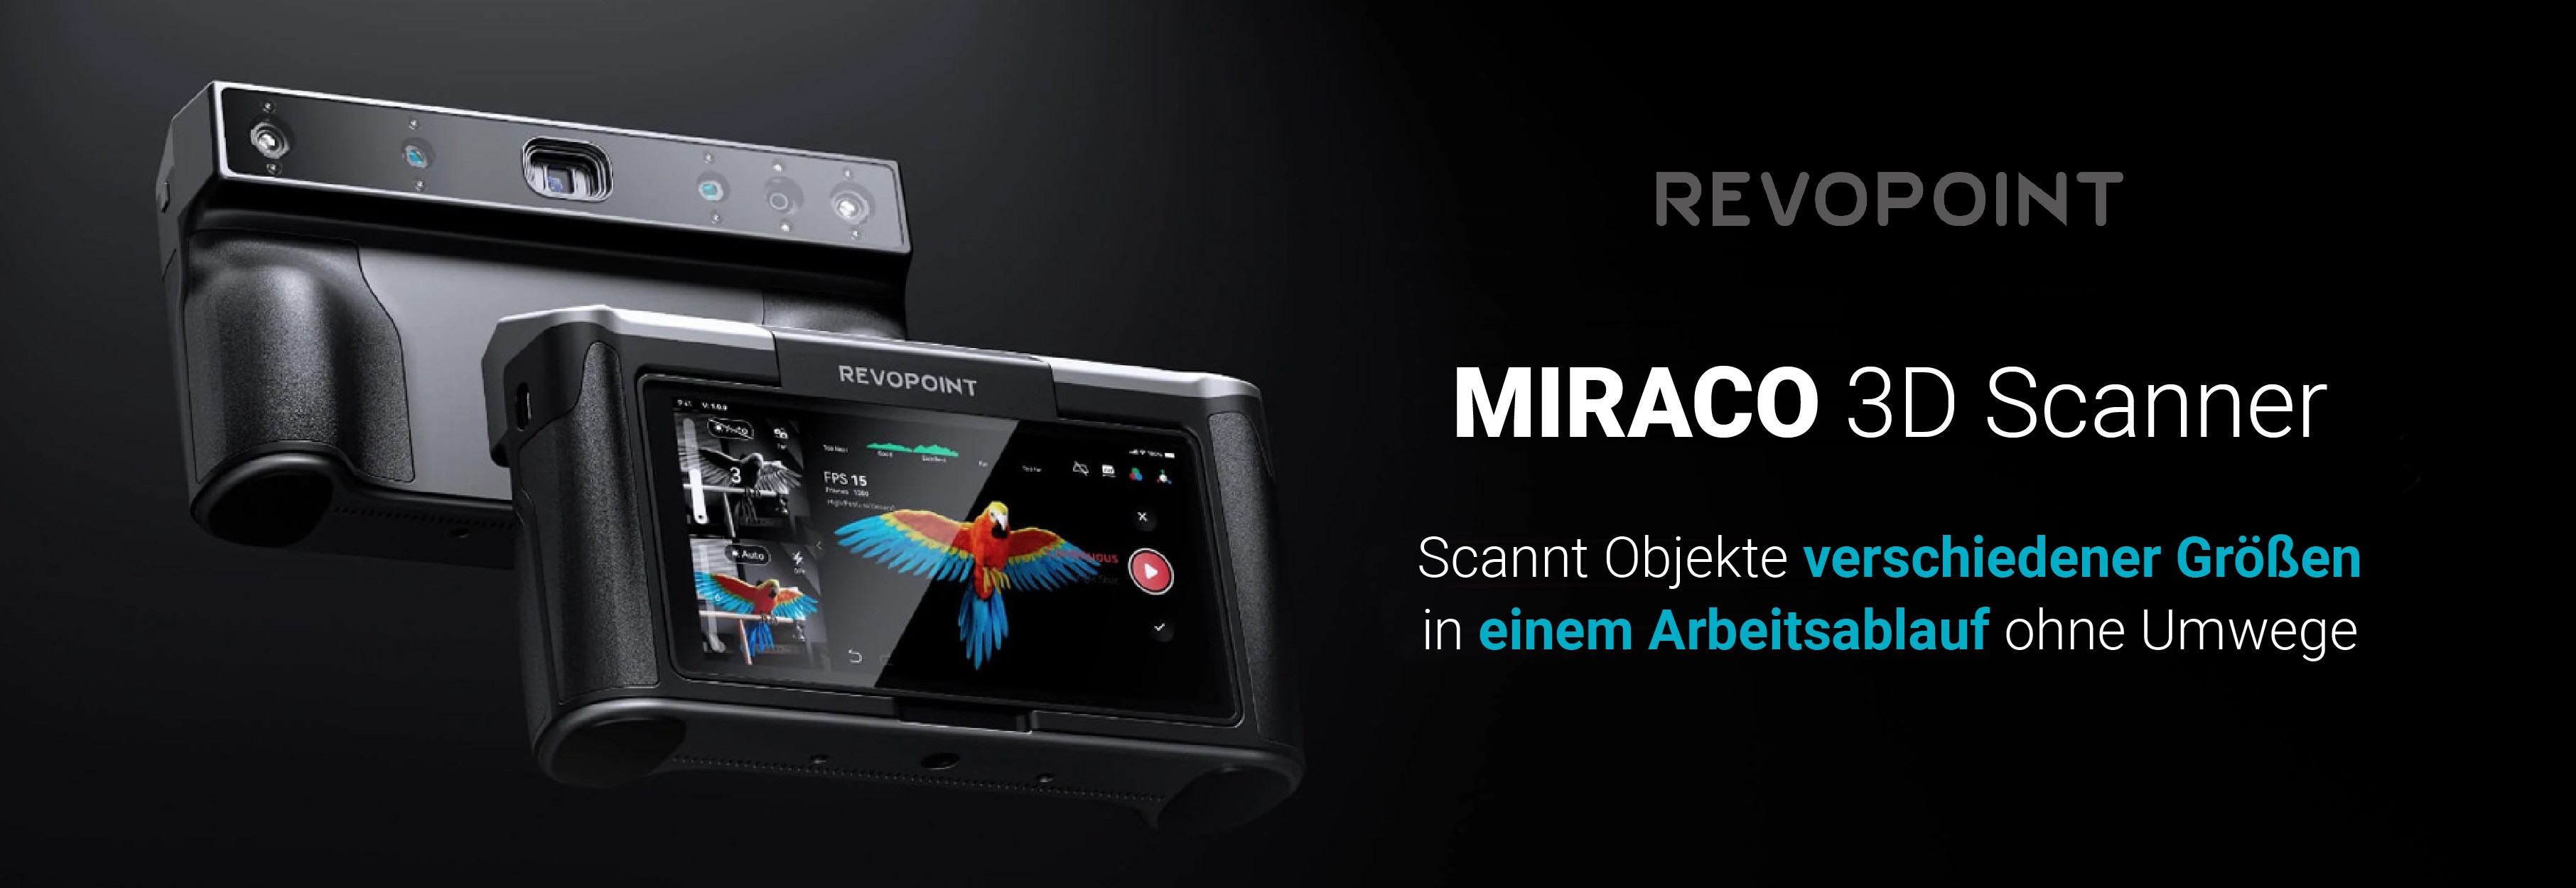 Revopoint Miraco 3D-Scanner